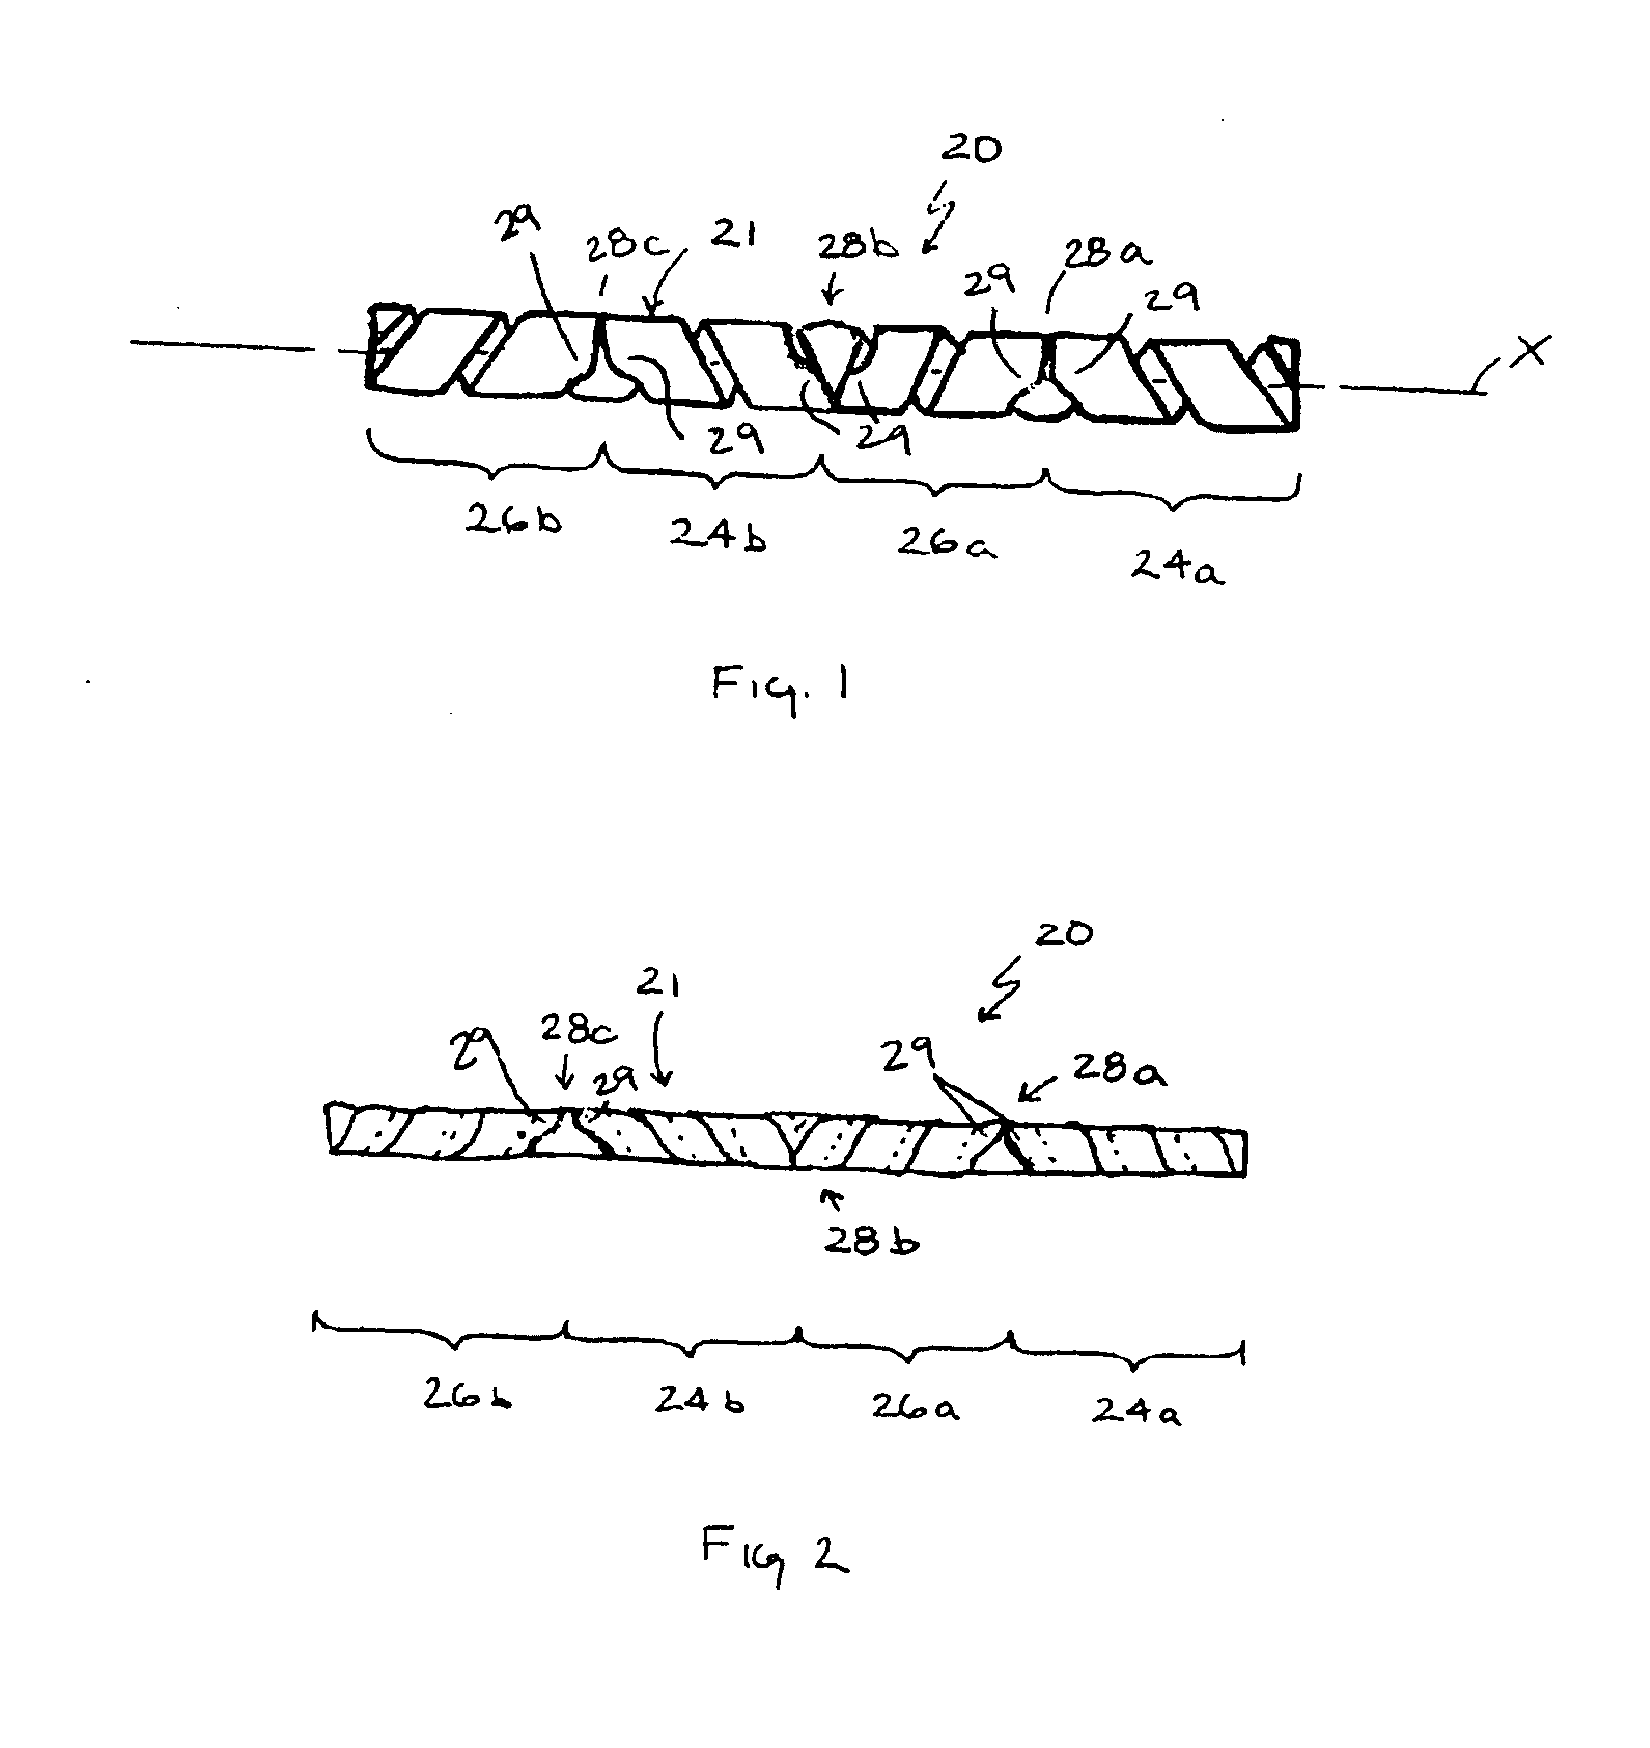 Vascular Prosthesis and Methods of Use